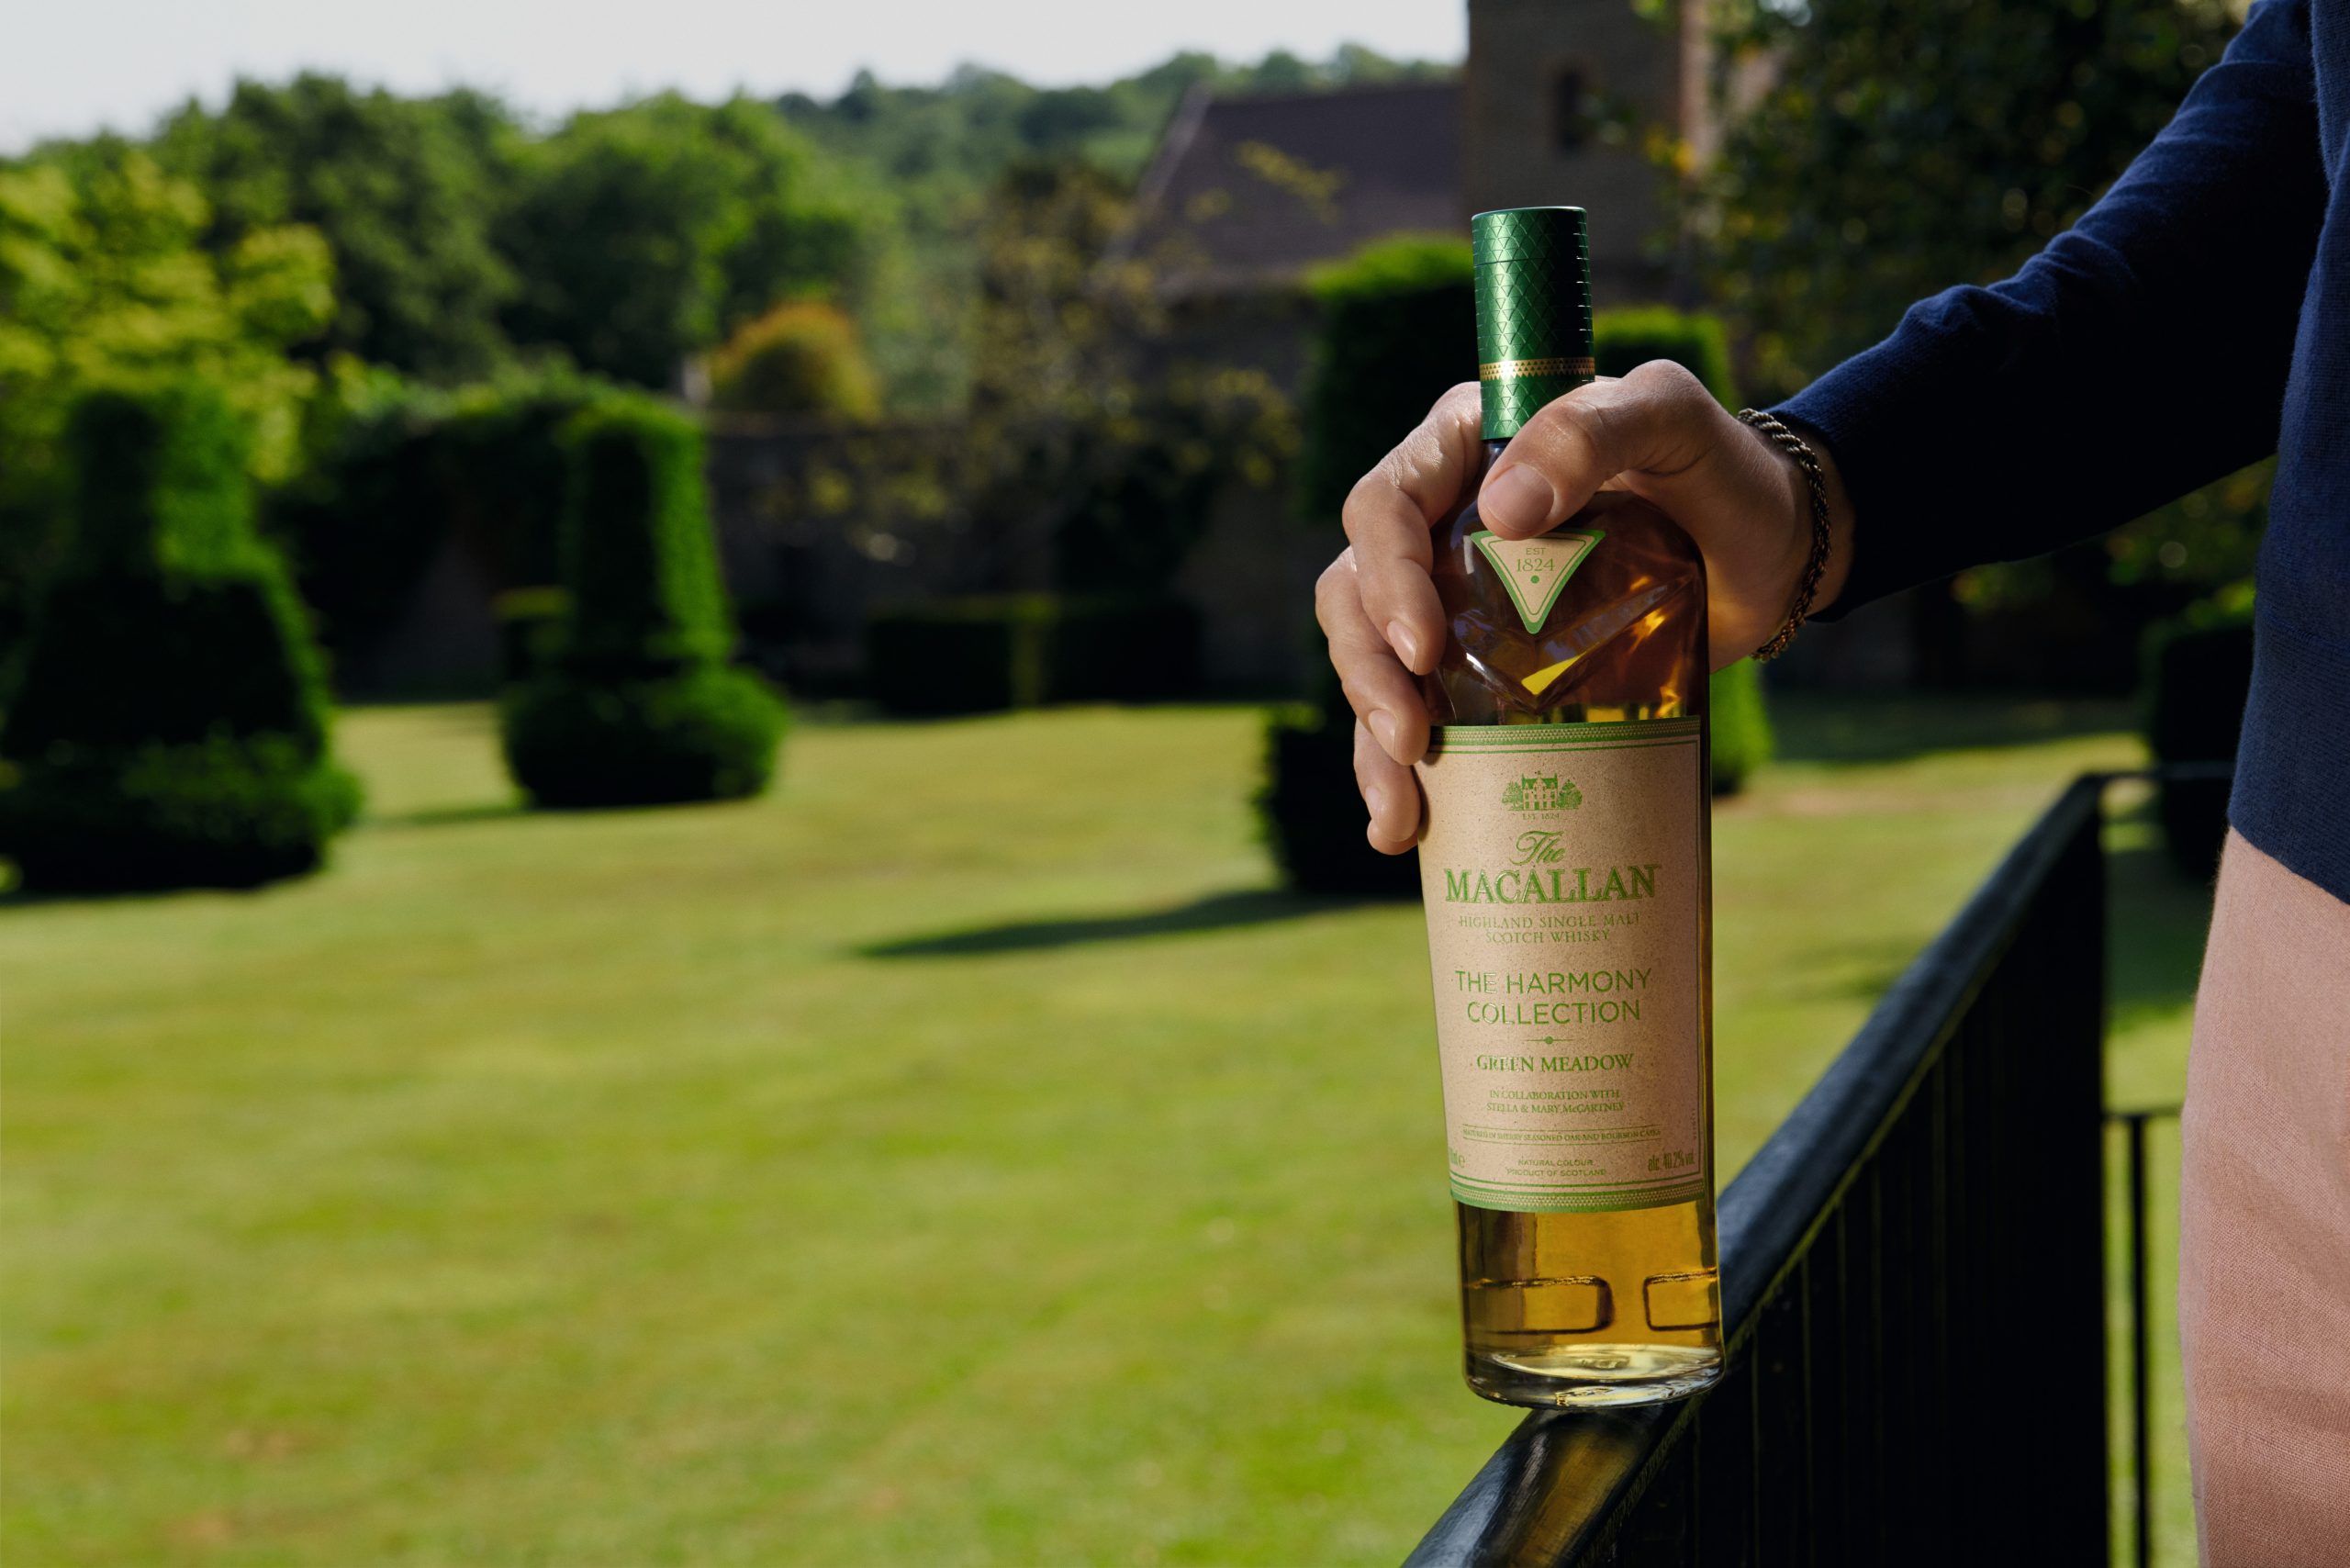 For the well travelled: The Macallan Harmony Collection Green Meadow